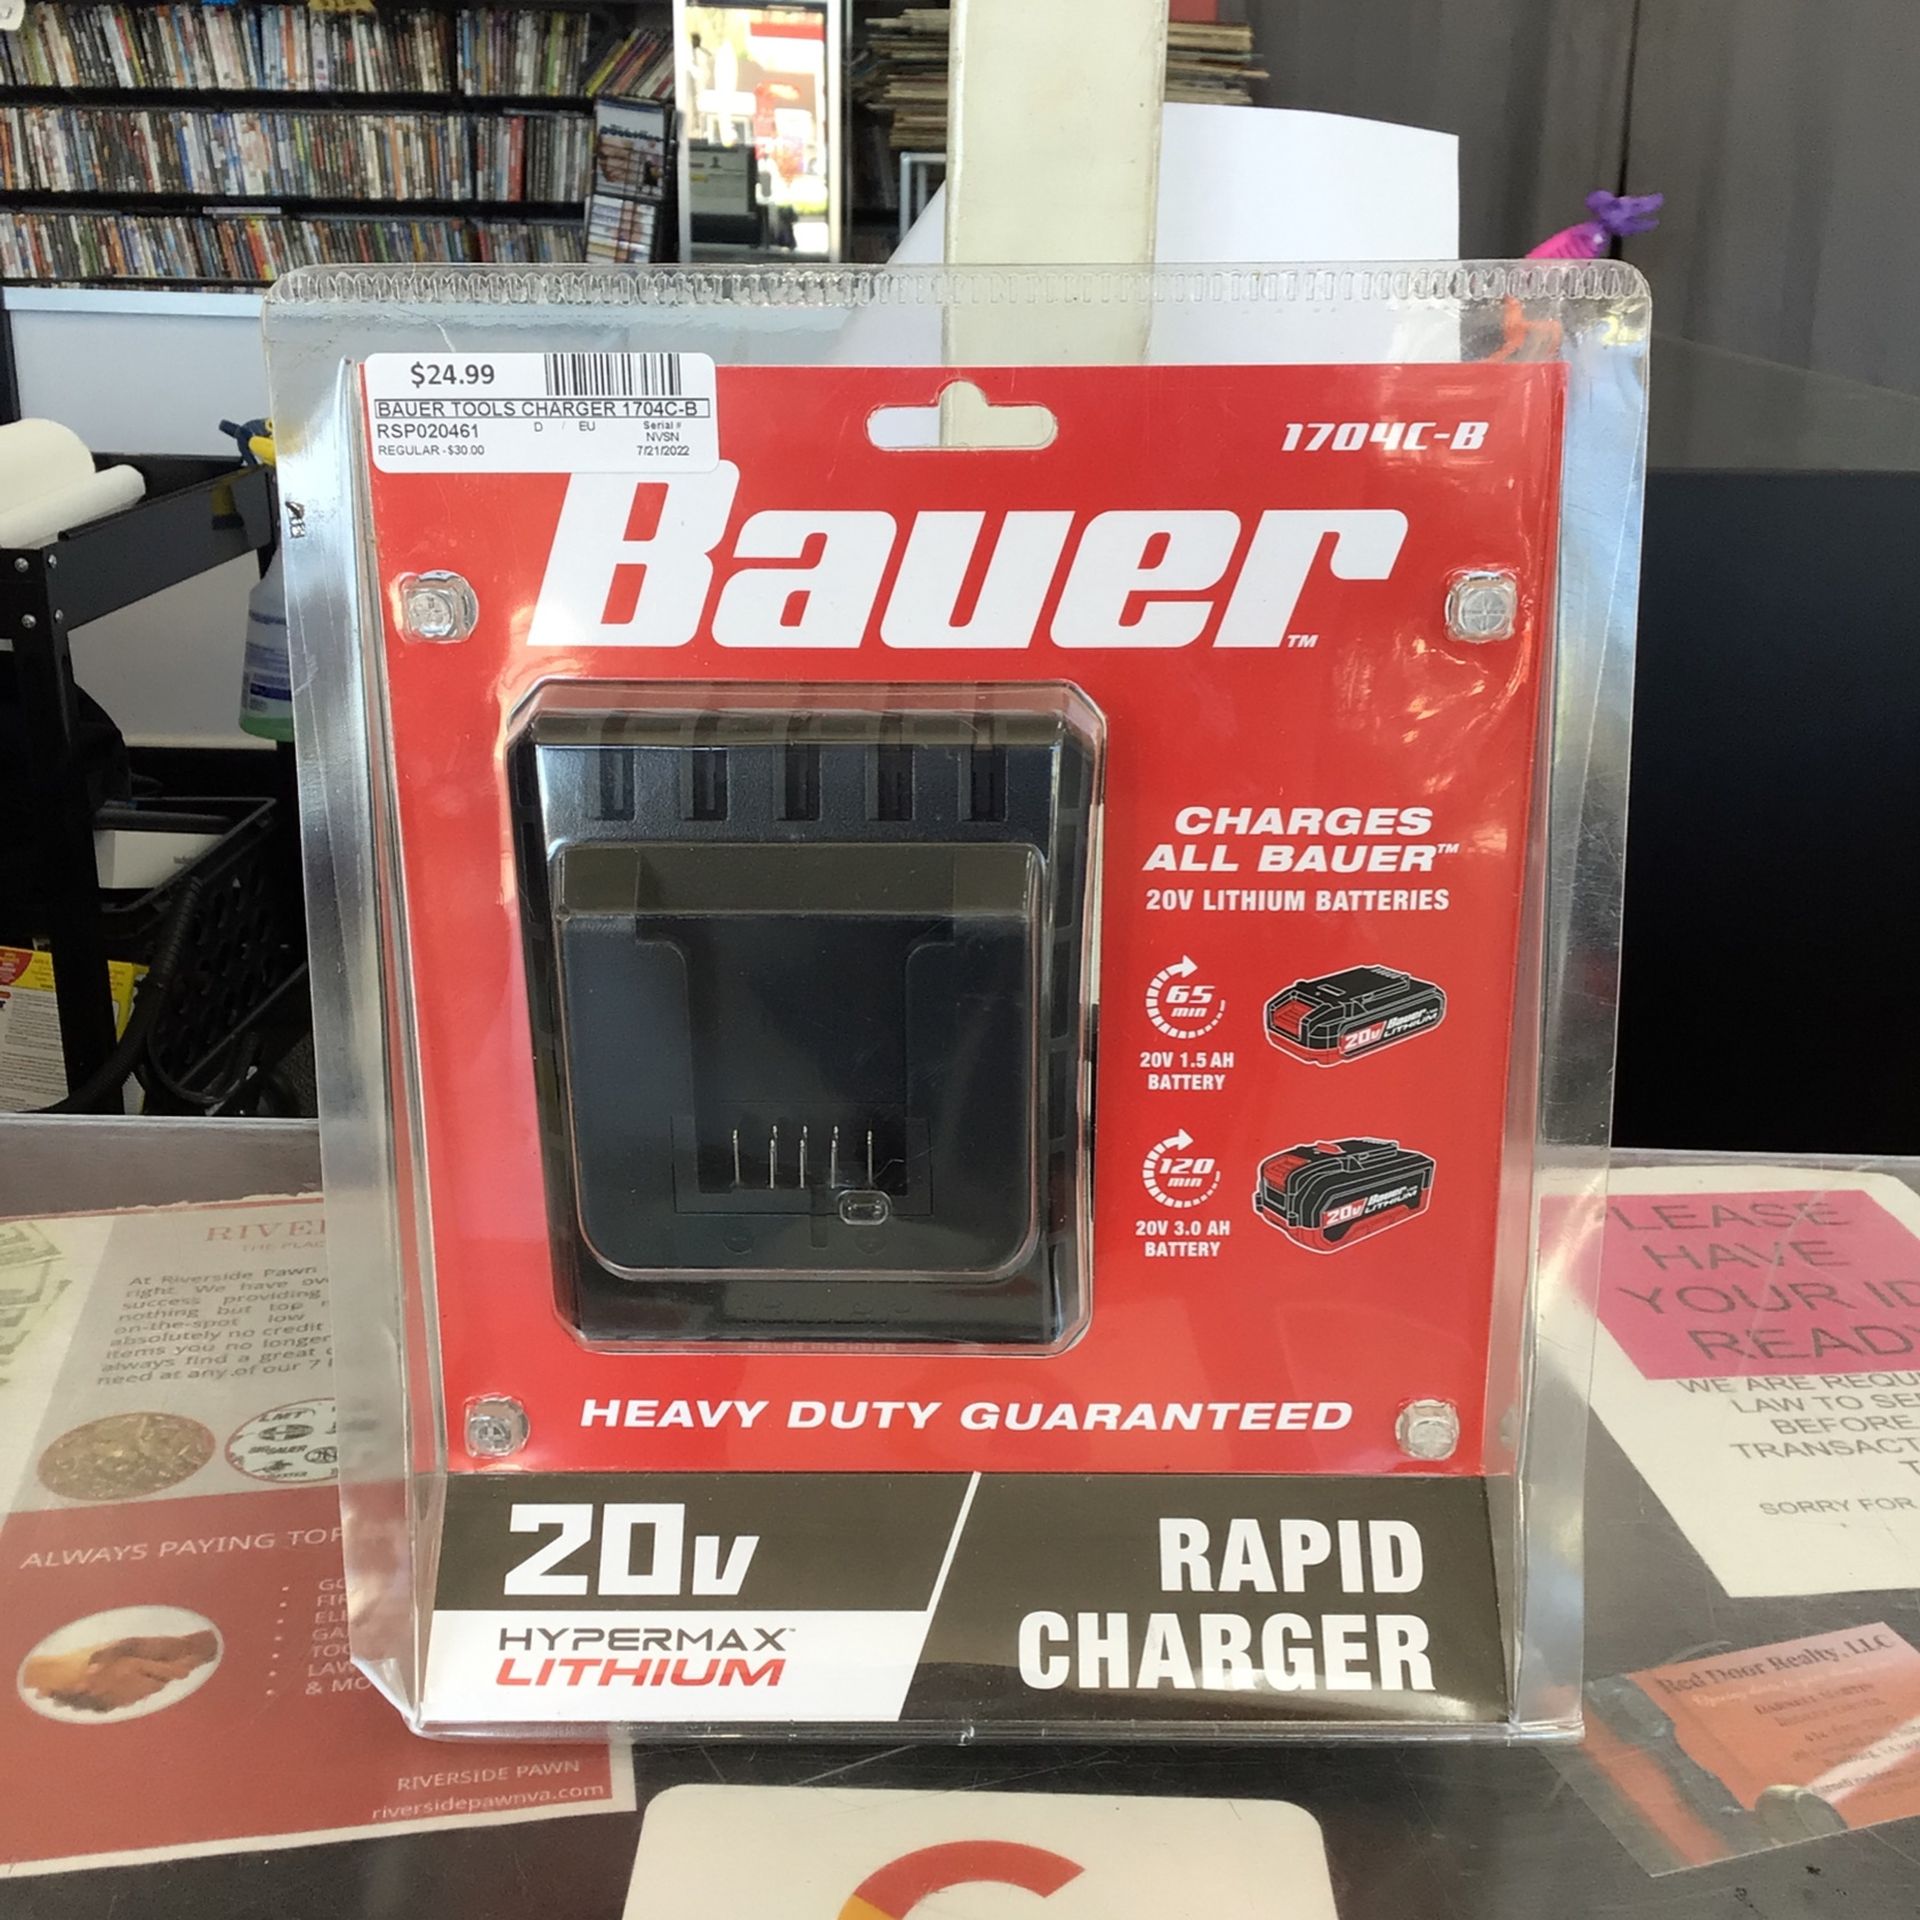 Bauer Rapid Charger 1704c-b